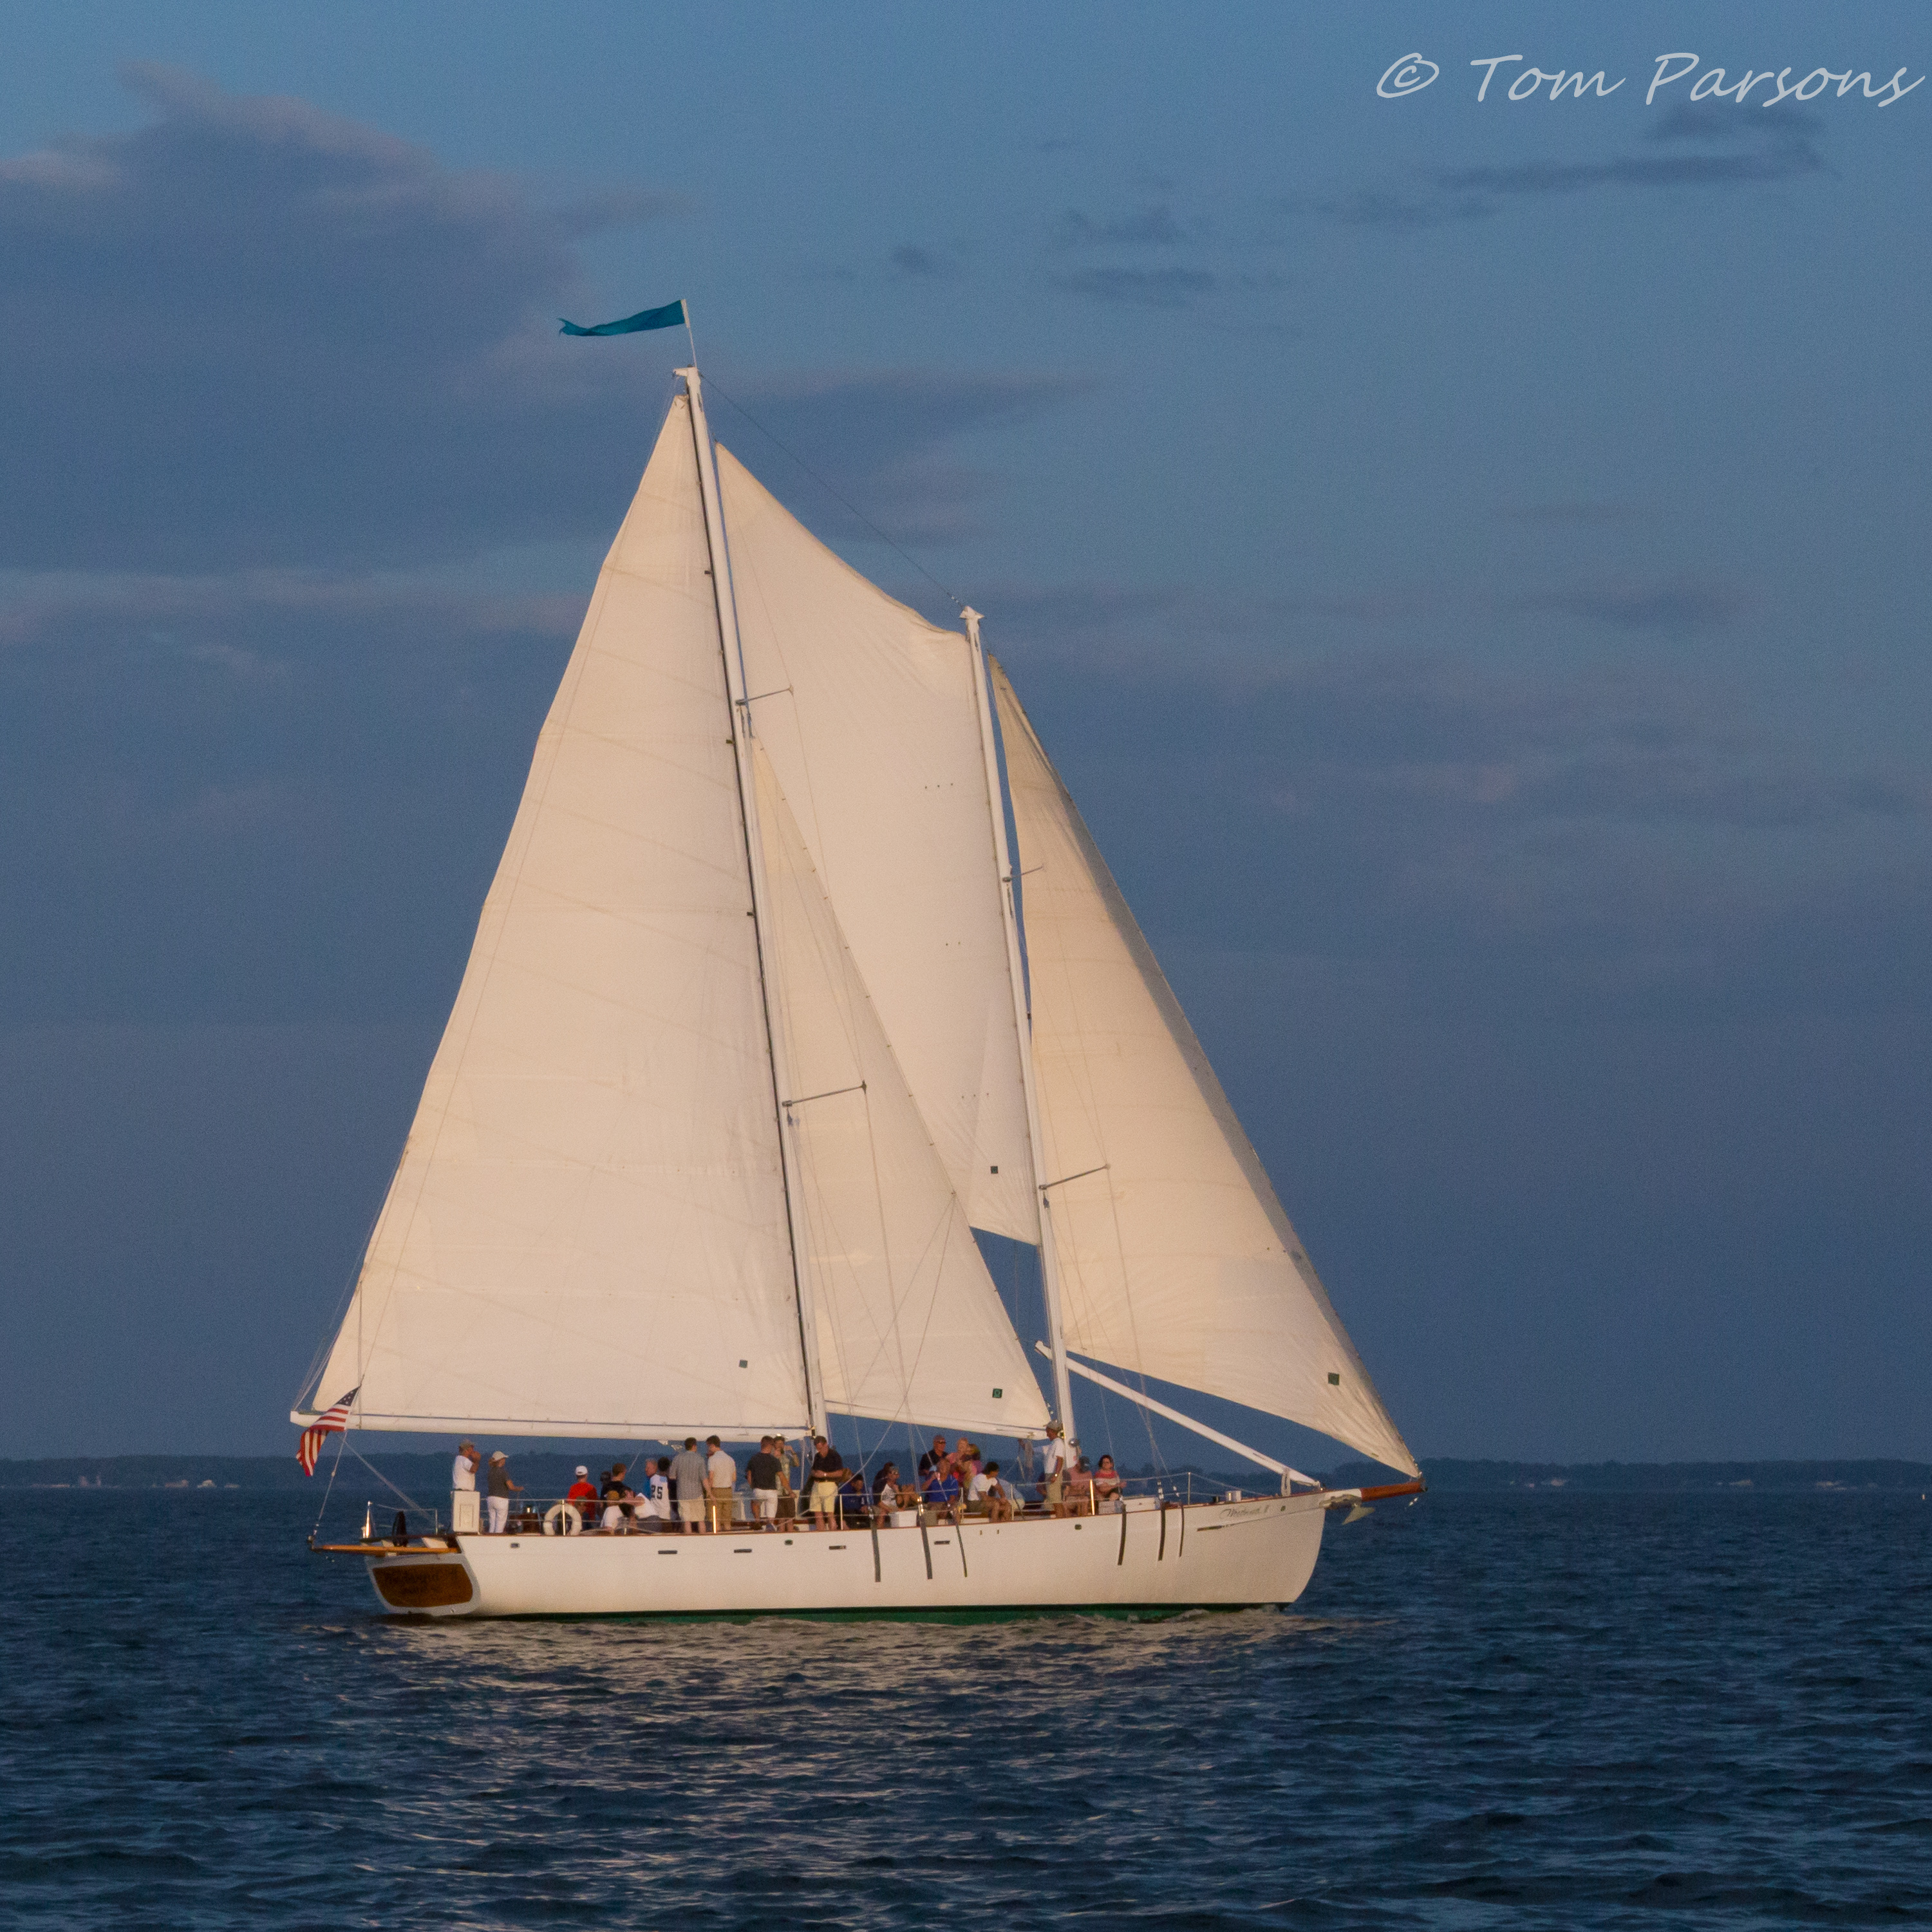 Beautiful White sails of the schooner against blue skies and water